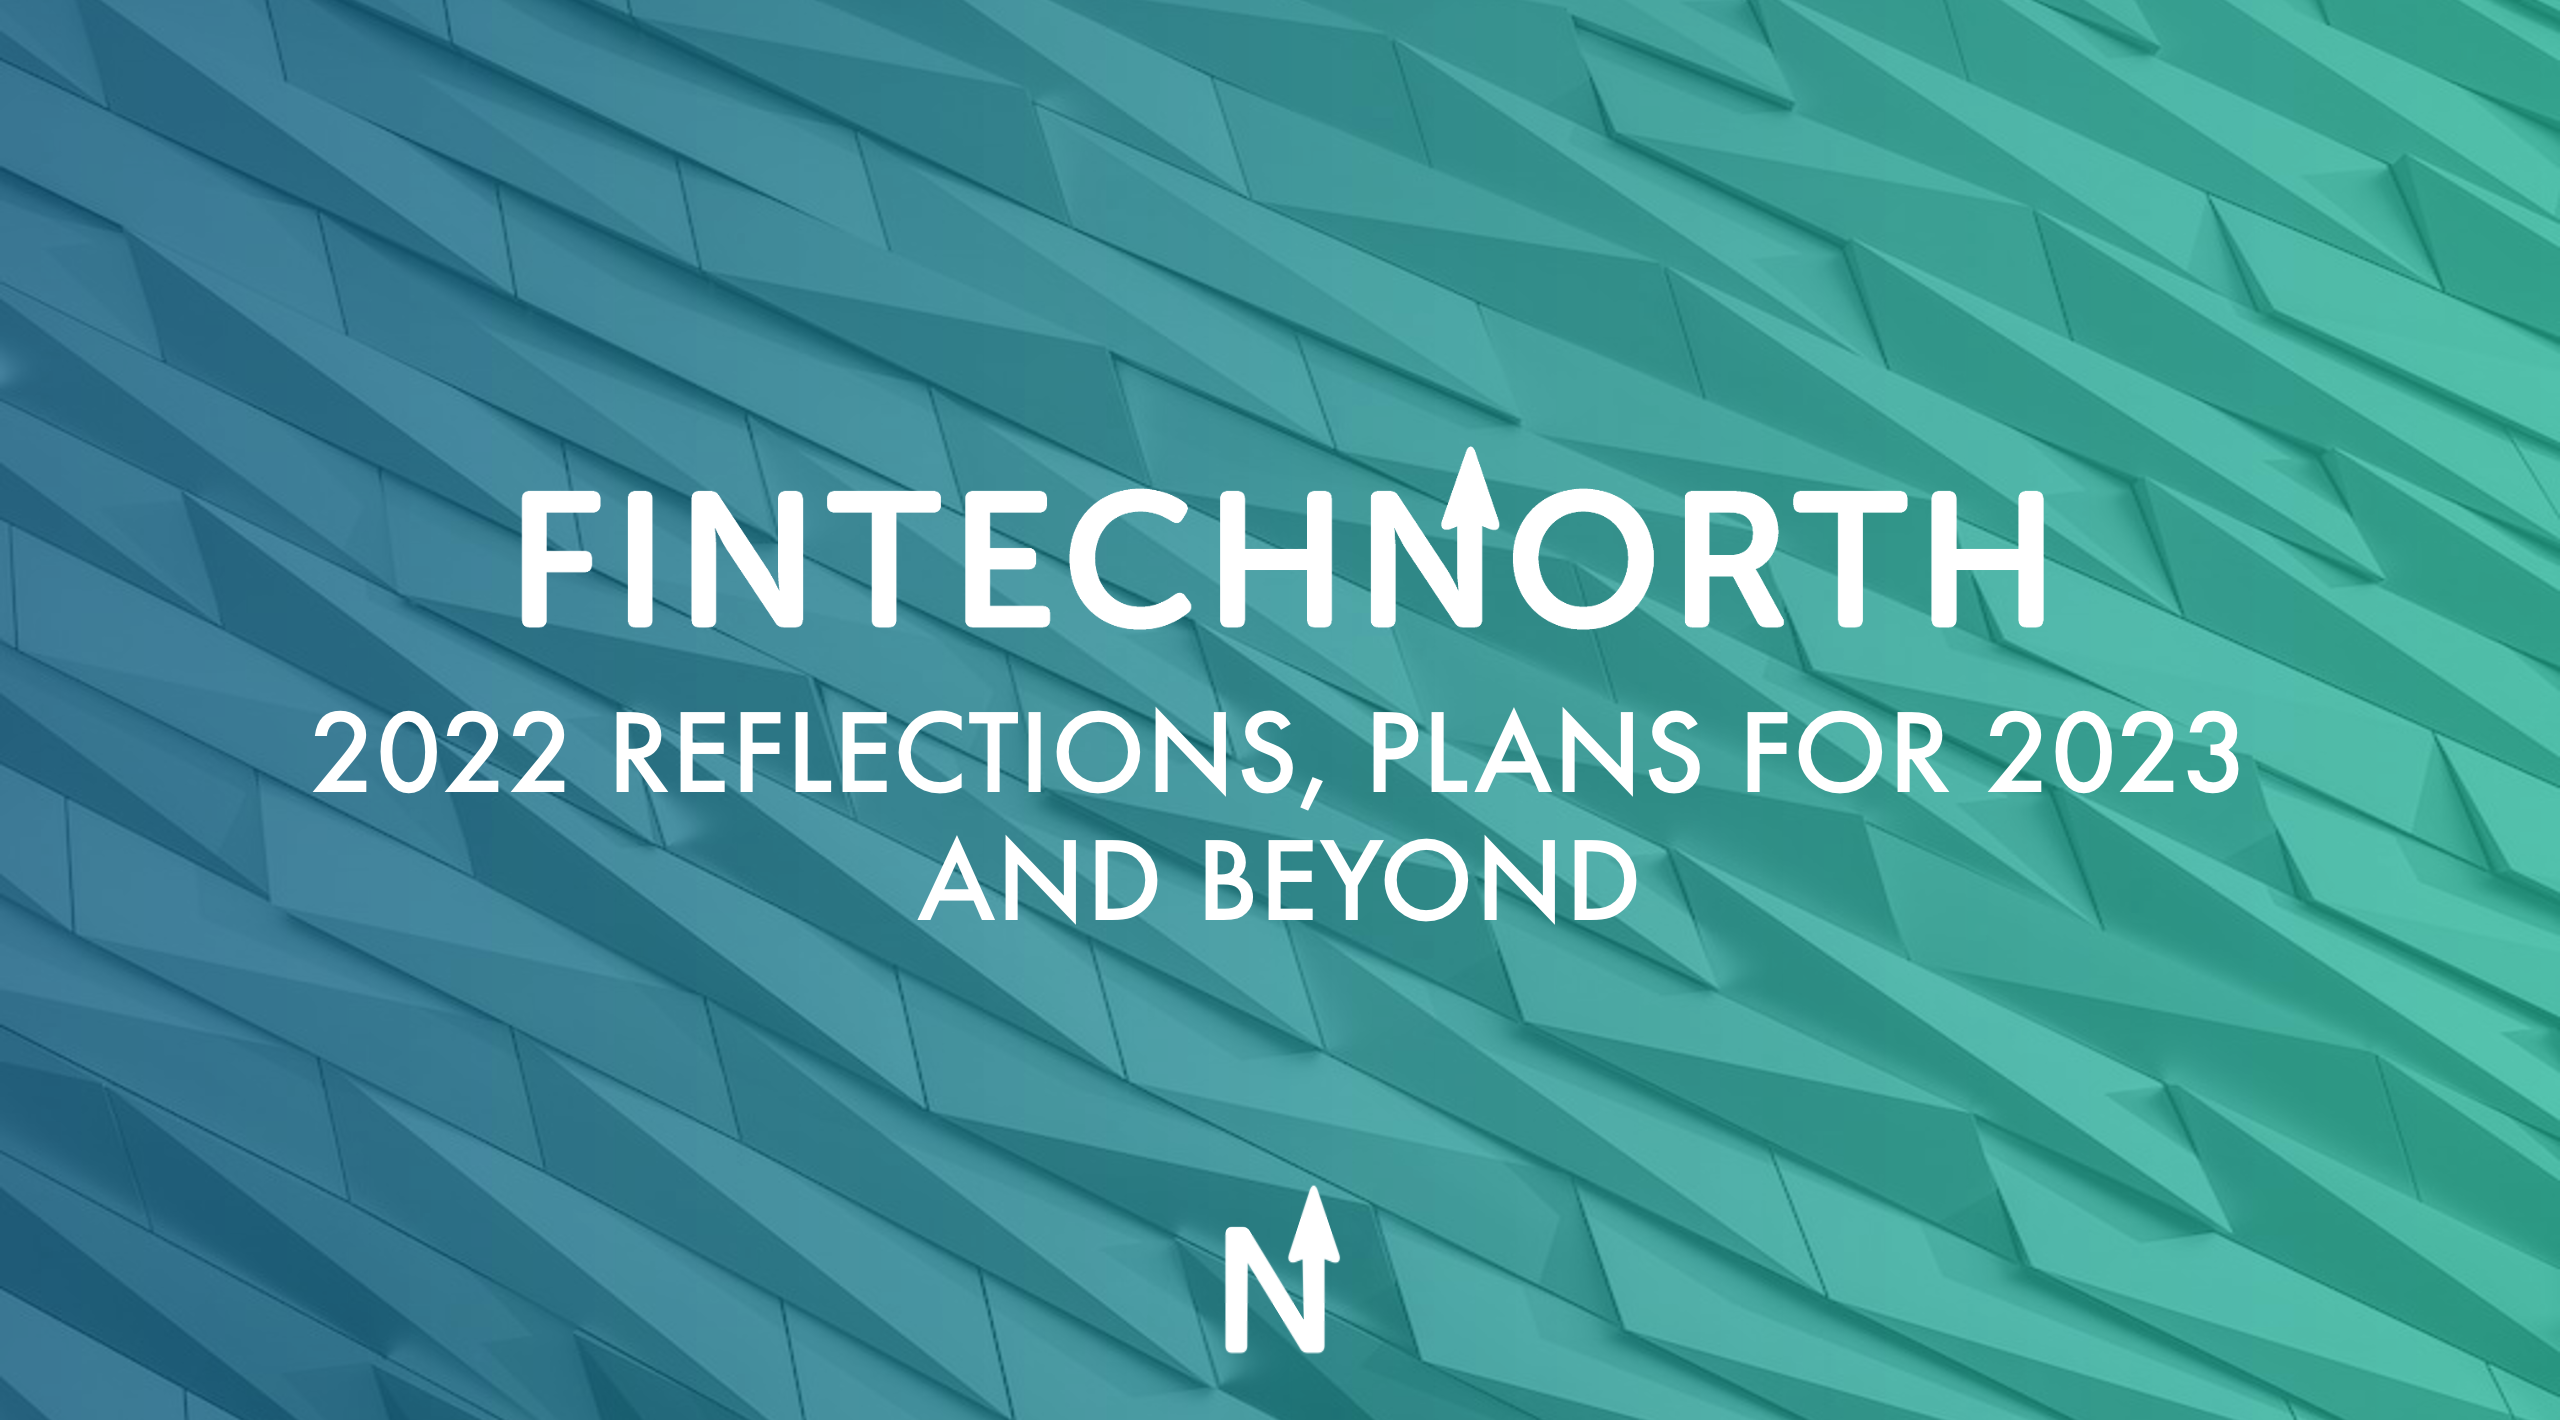 FinTech North – 2022 reflections, plans for 2023 and beyond